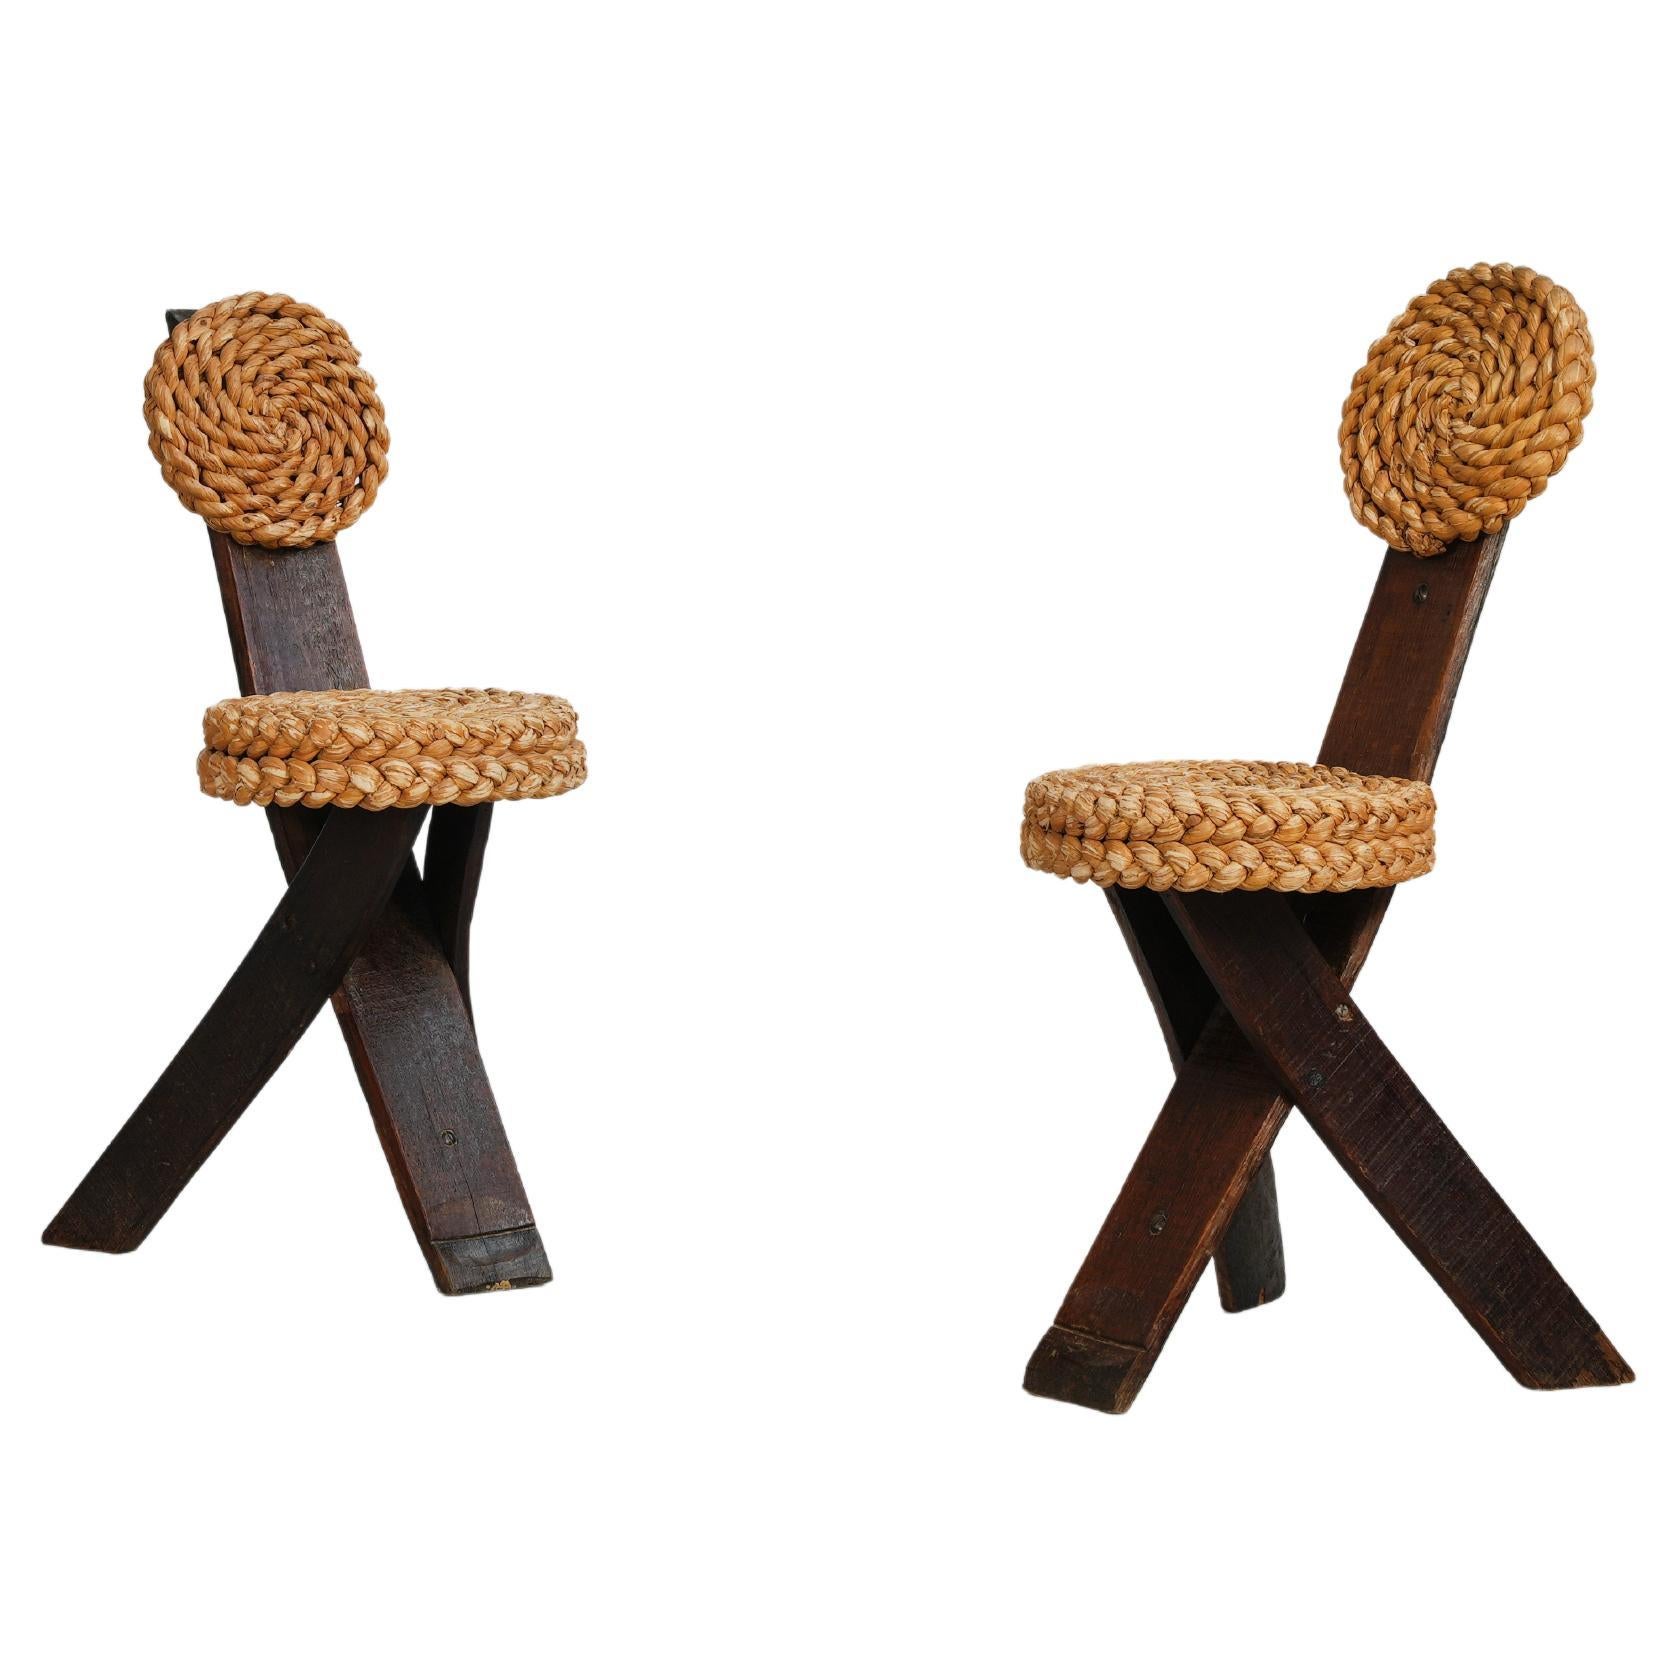 Original pair of Frida Minet and Adrien Audoux tripod chairs, 1950s France For Sale